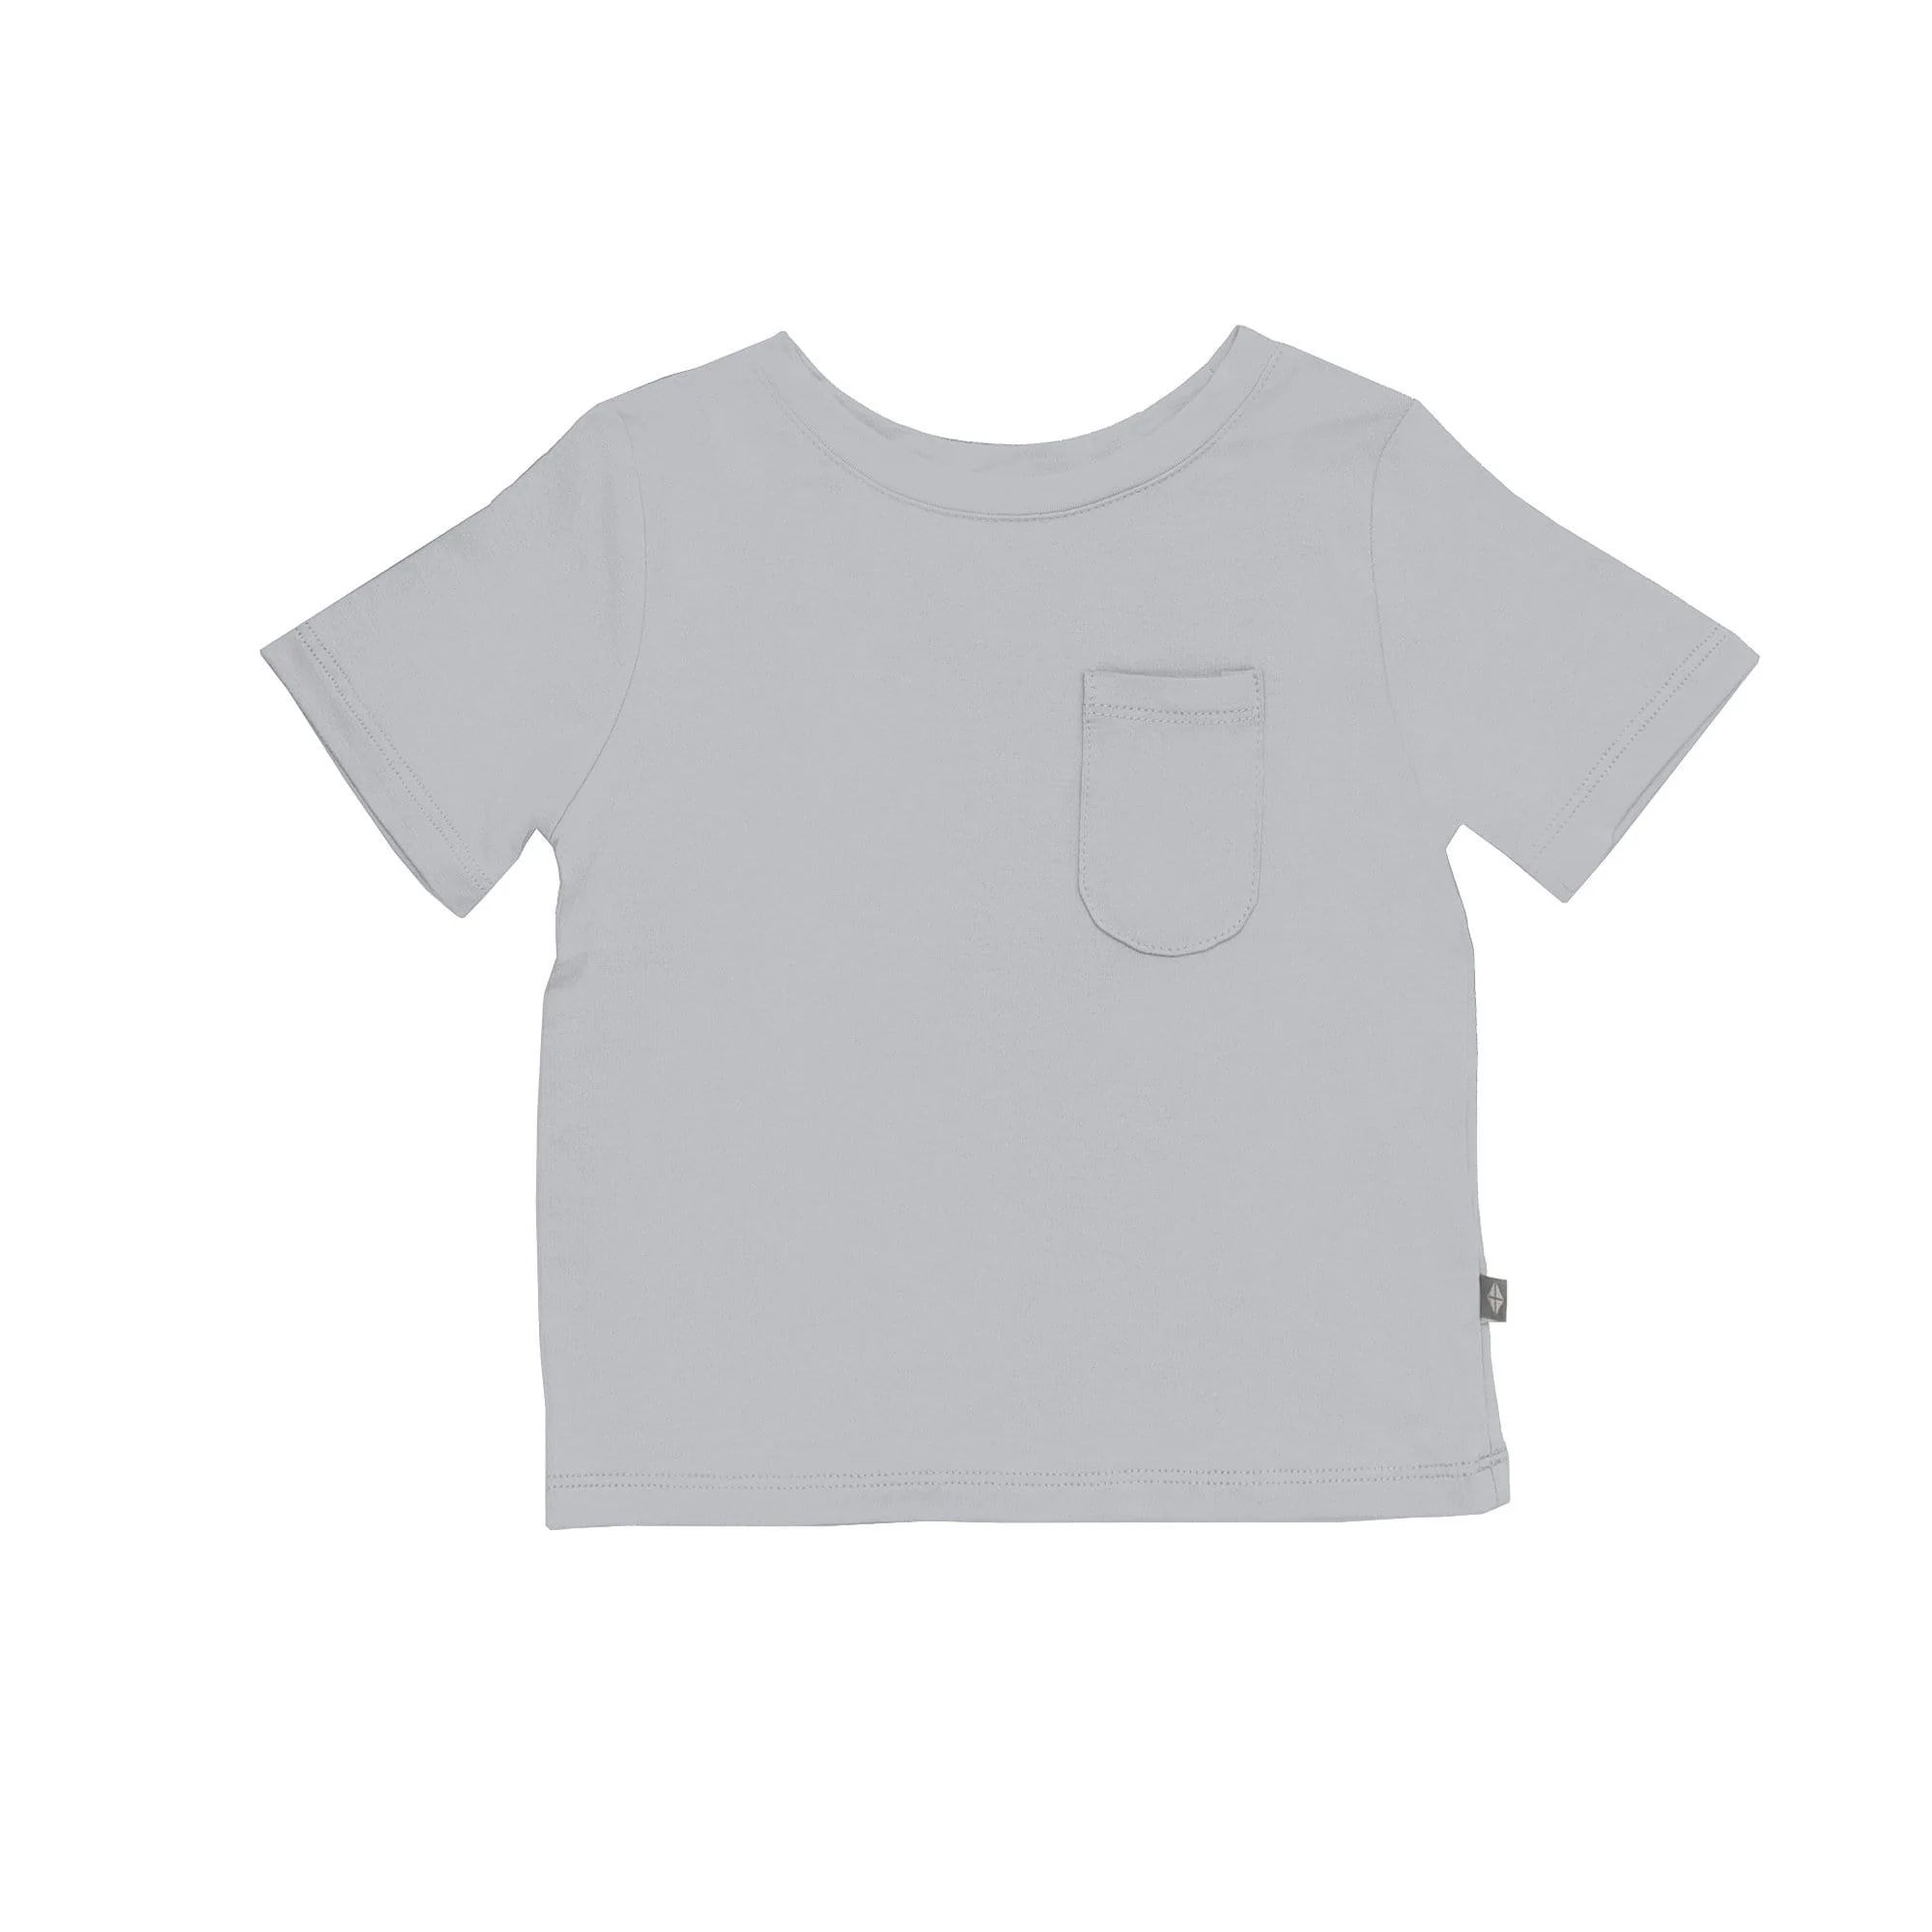 Toddler Unisex Tee in Storm | Kyte BABY